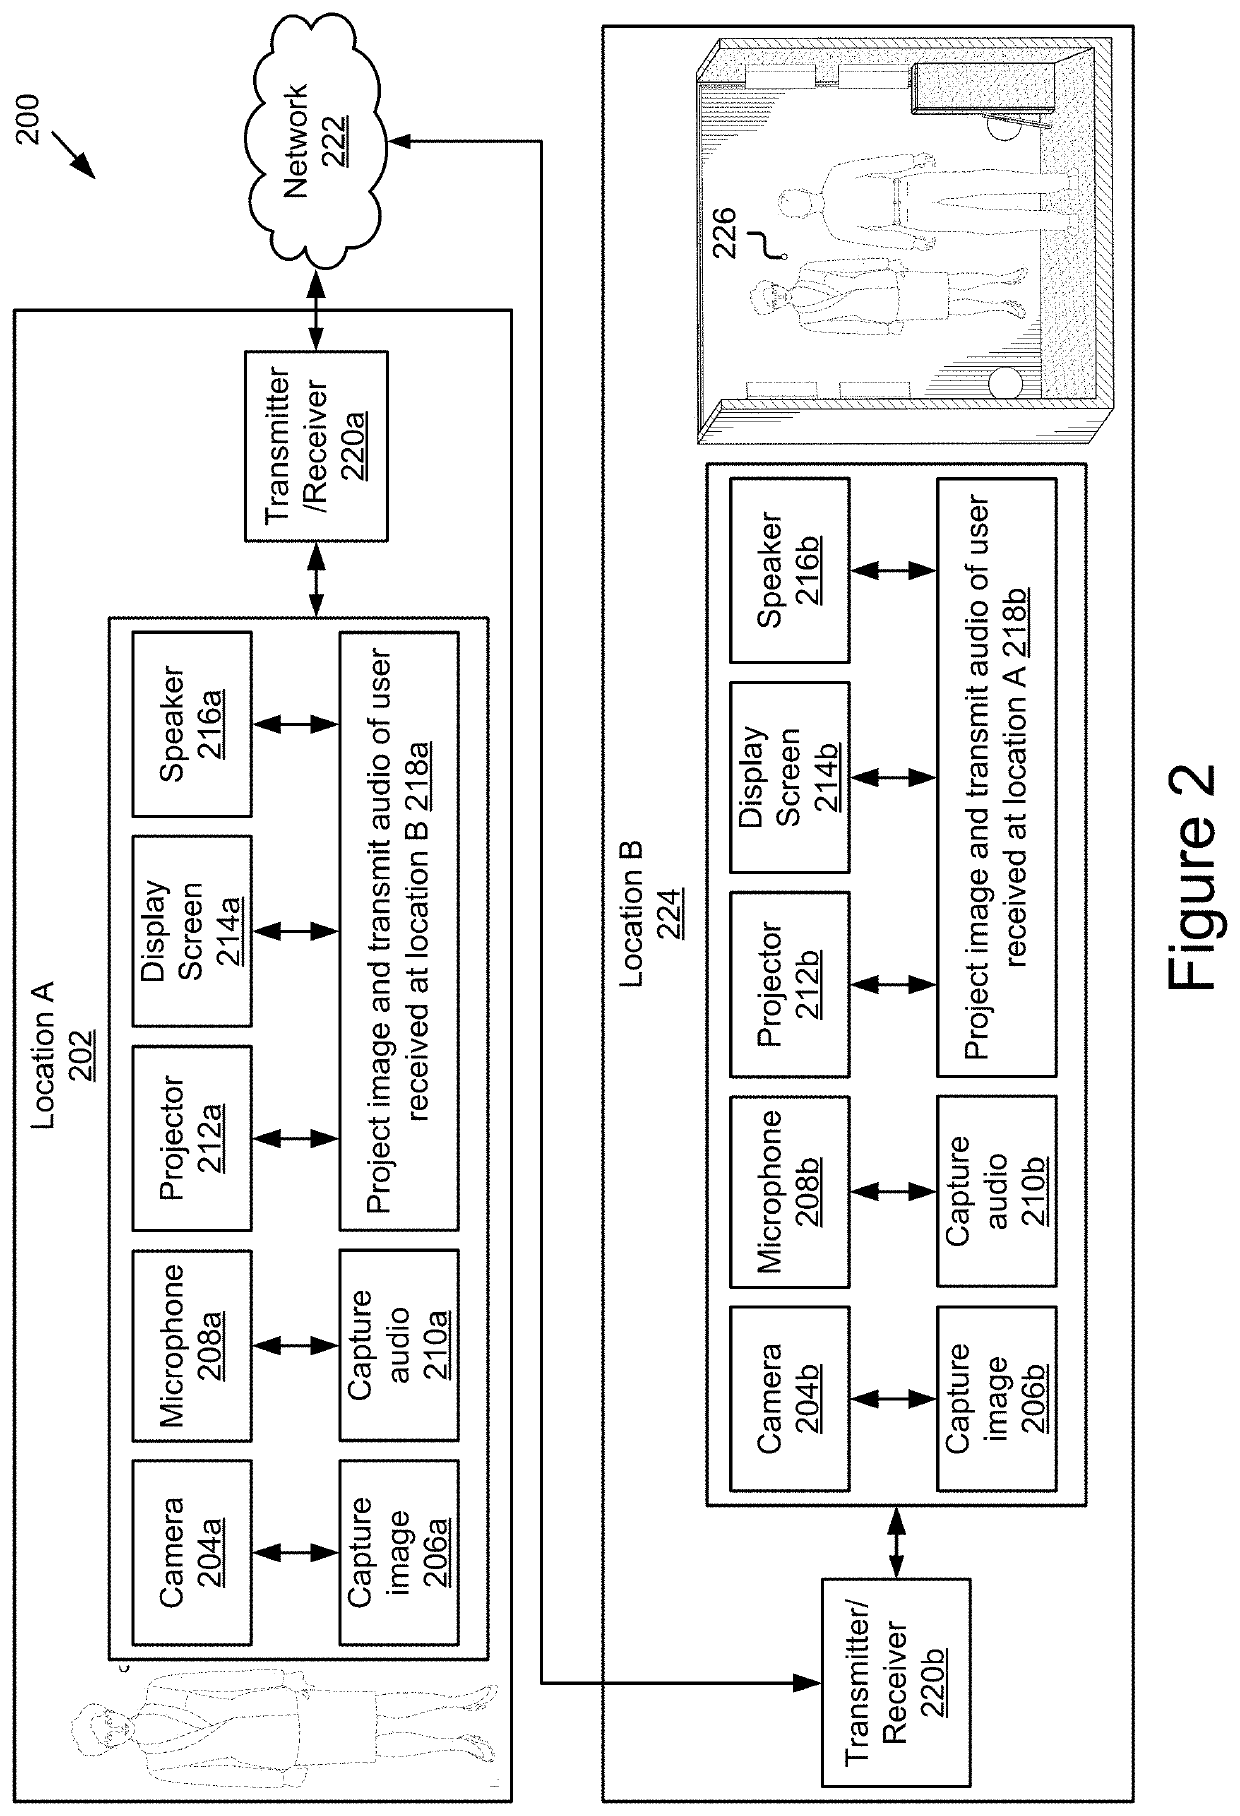 Network architecture for immersive audio-visual communications